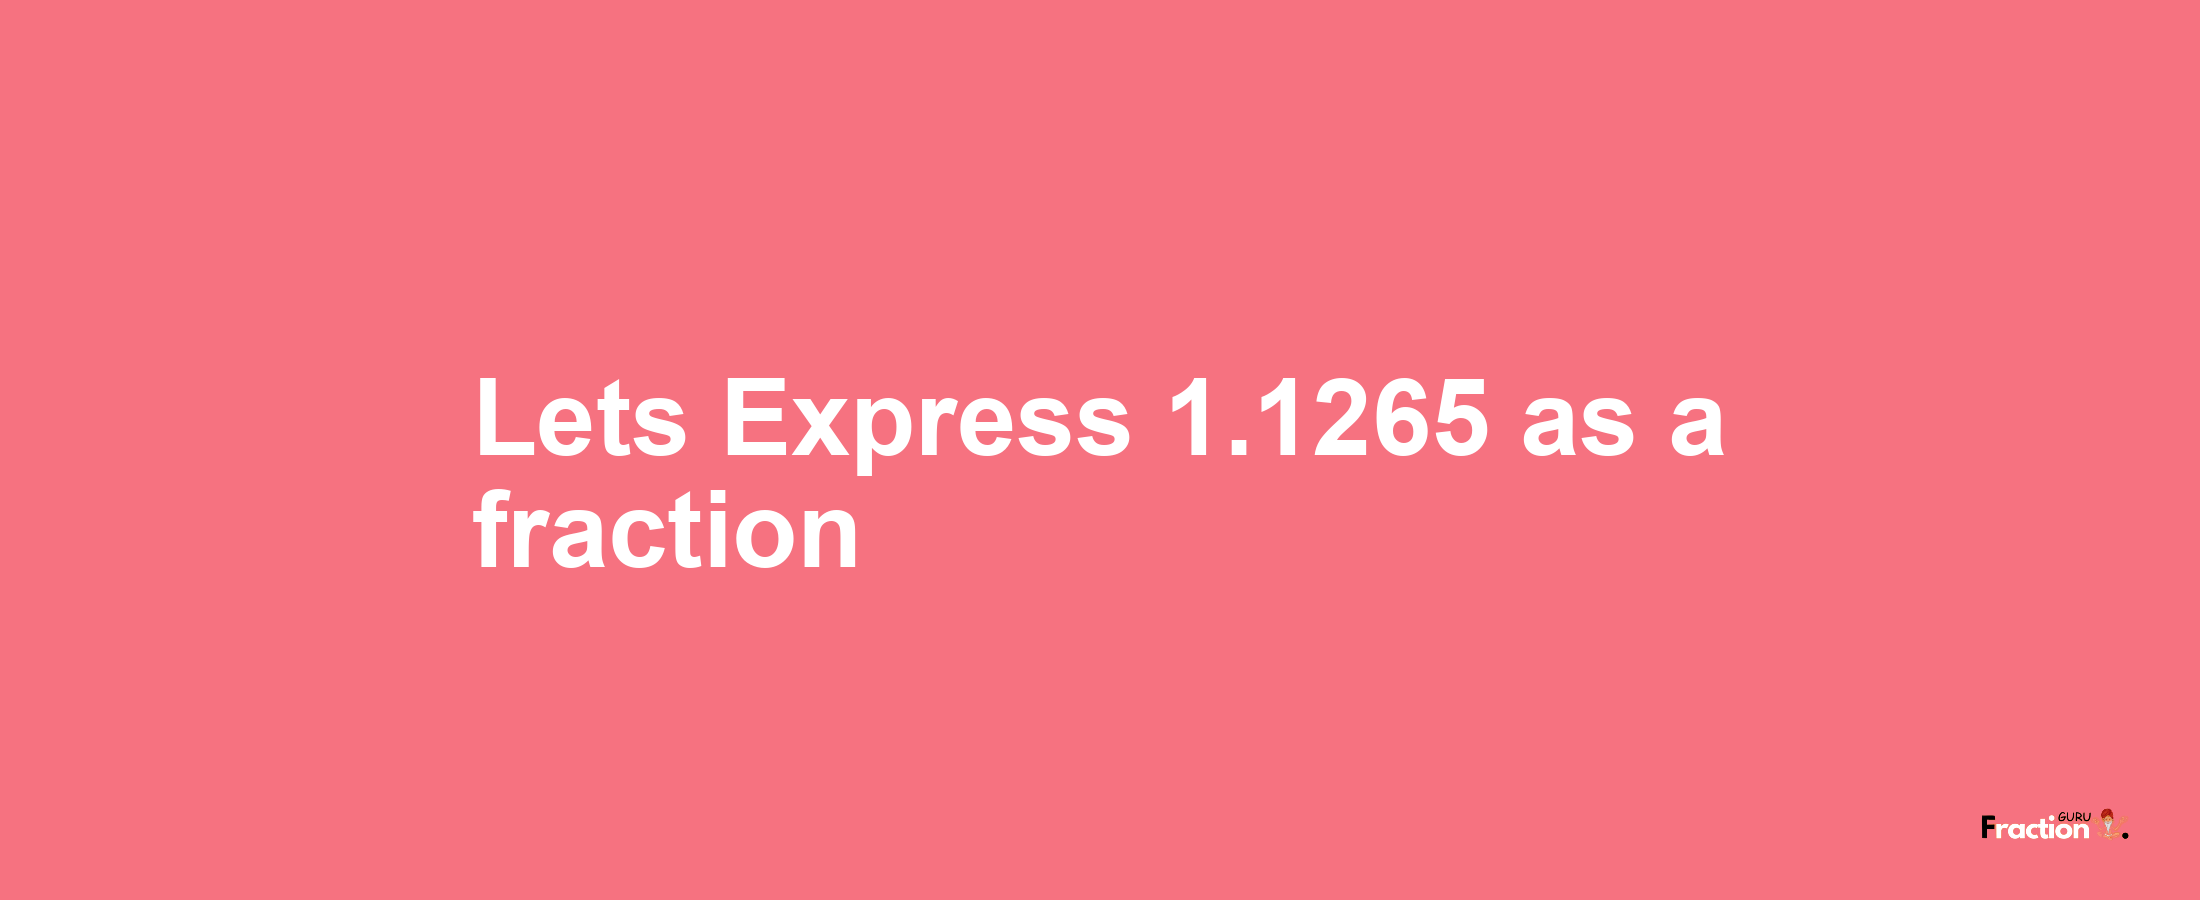 Lets Express 1.1265 as afraction